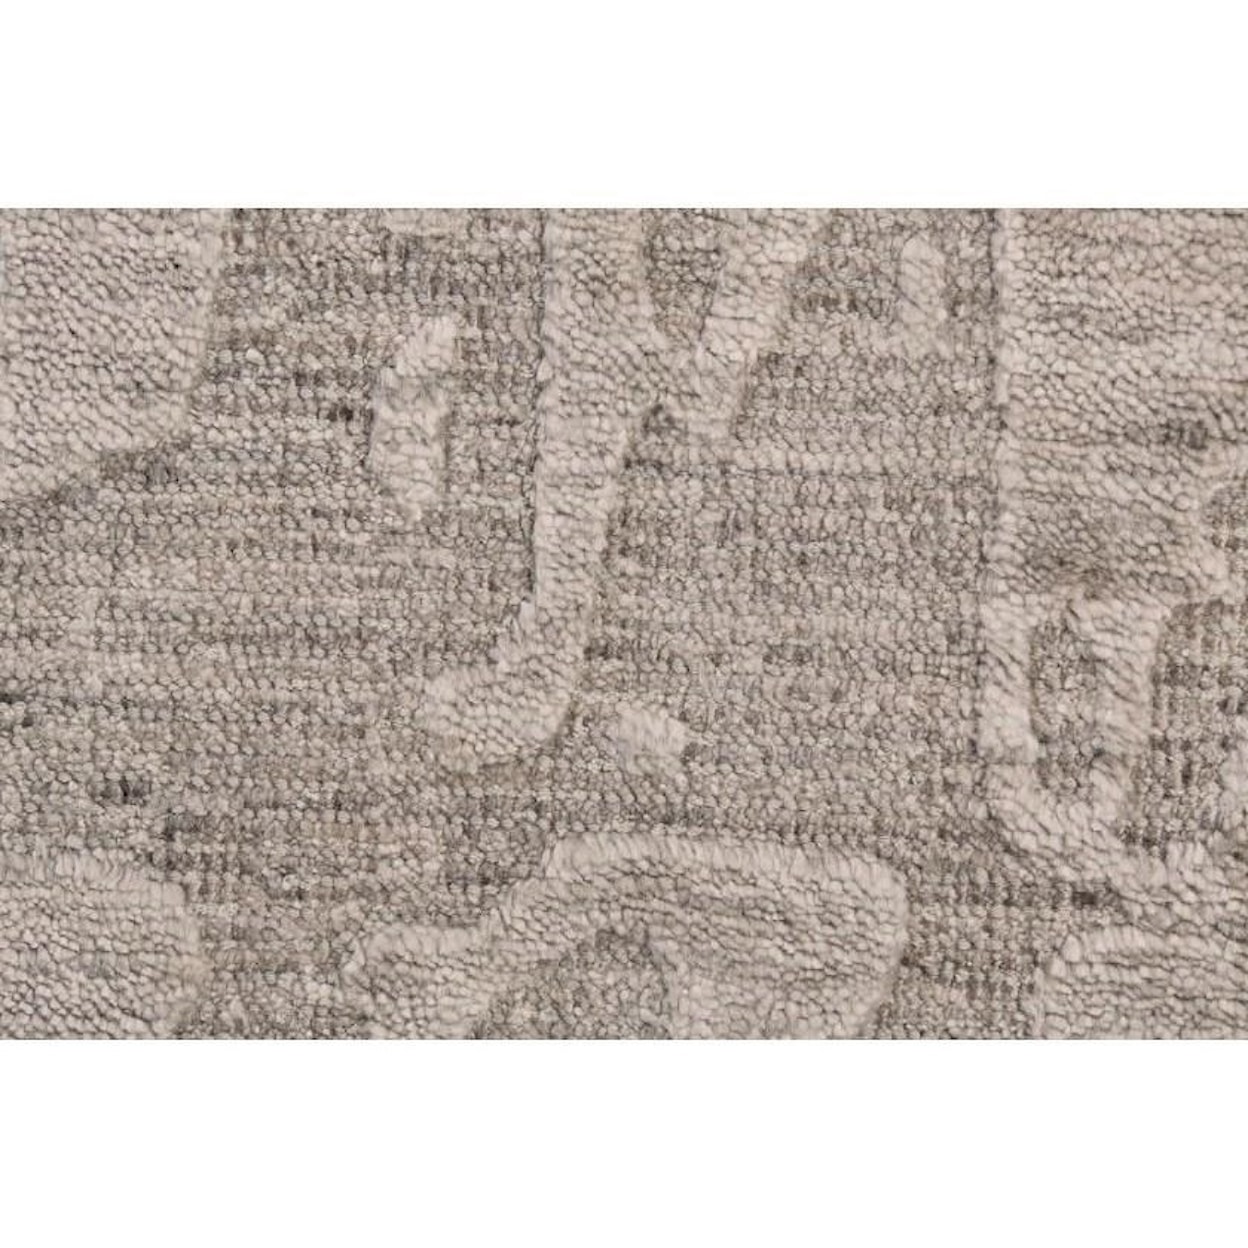 Feizy Rugs Leilani Taupe 4' x 6' Area Rug